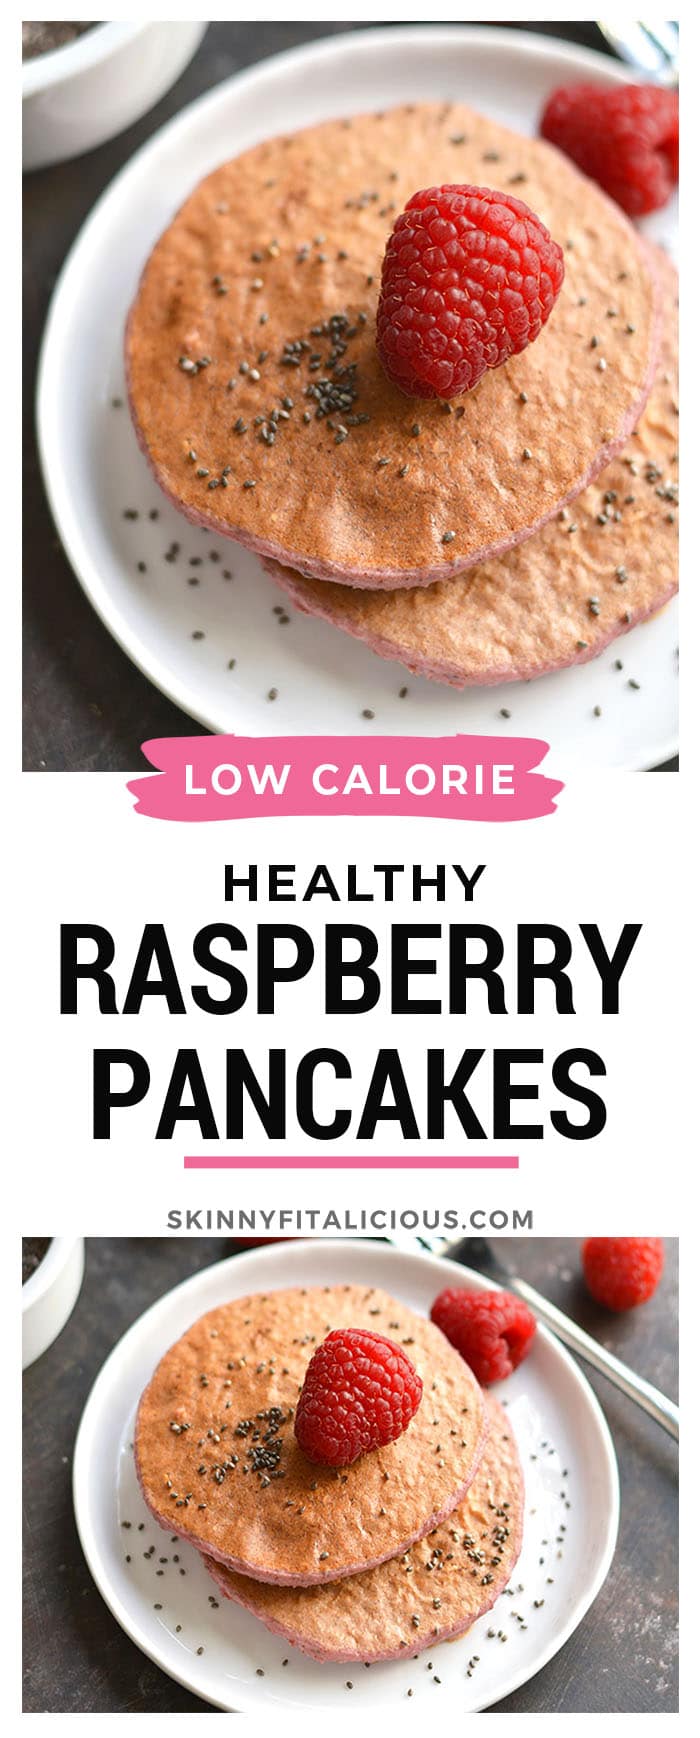 Raspberry Chia Protein Pancakes are too good to be true! Protein packed, made with simple wholesome ingredients, lower in sugar, and so tasty! Just blend, cook, and eat! Gluten Free + Low Calorie